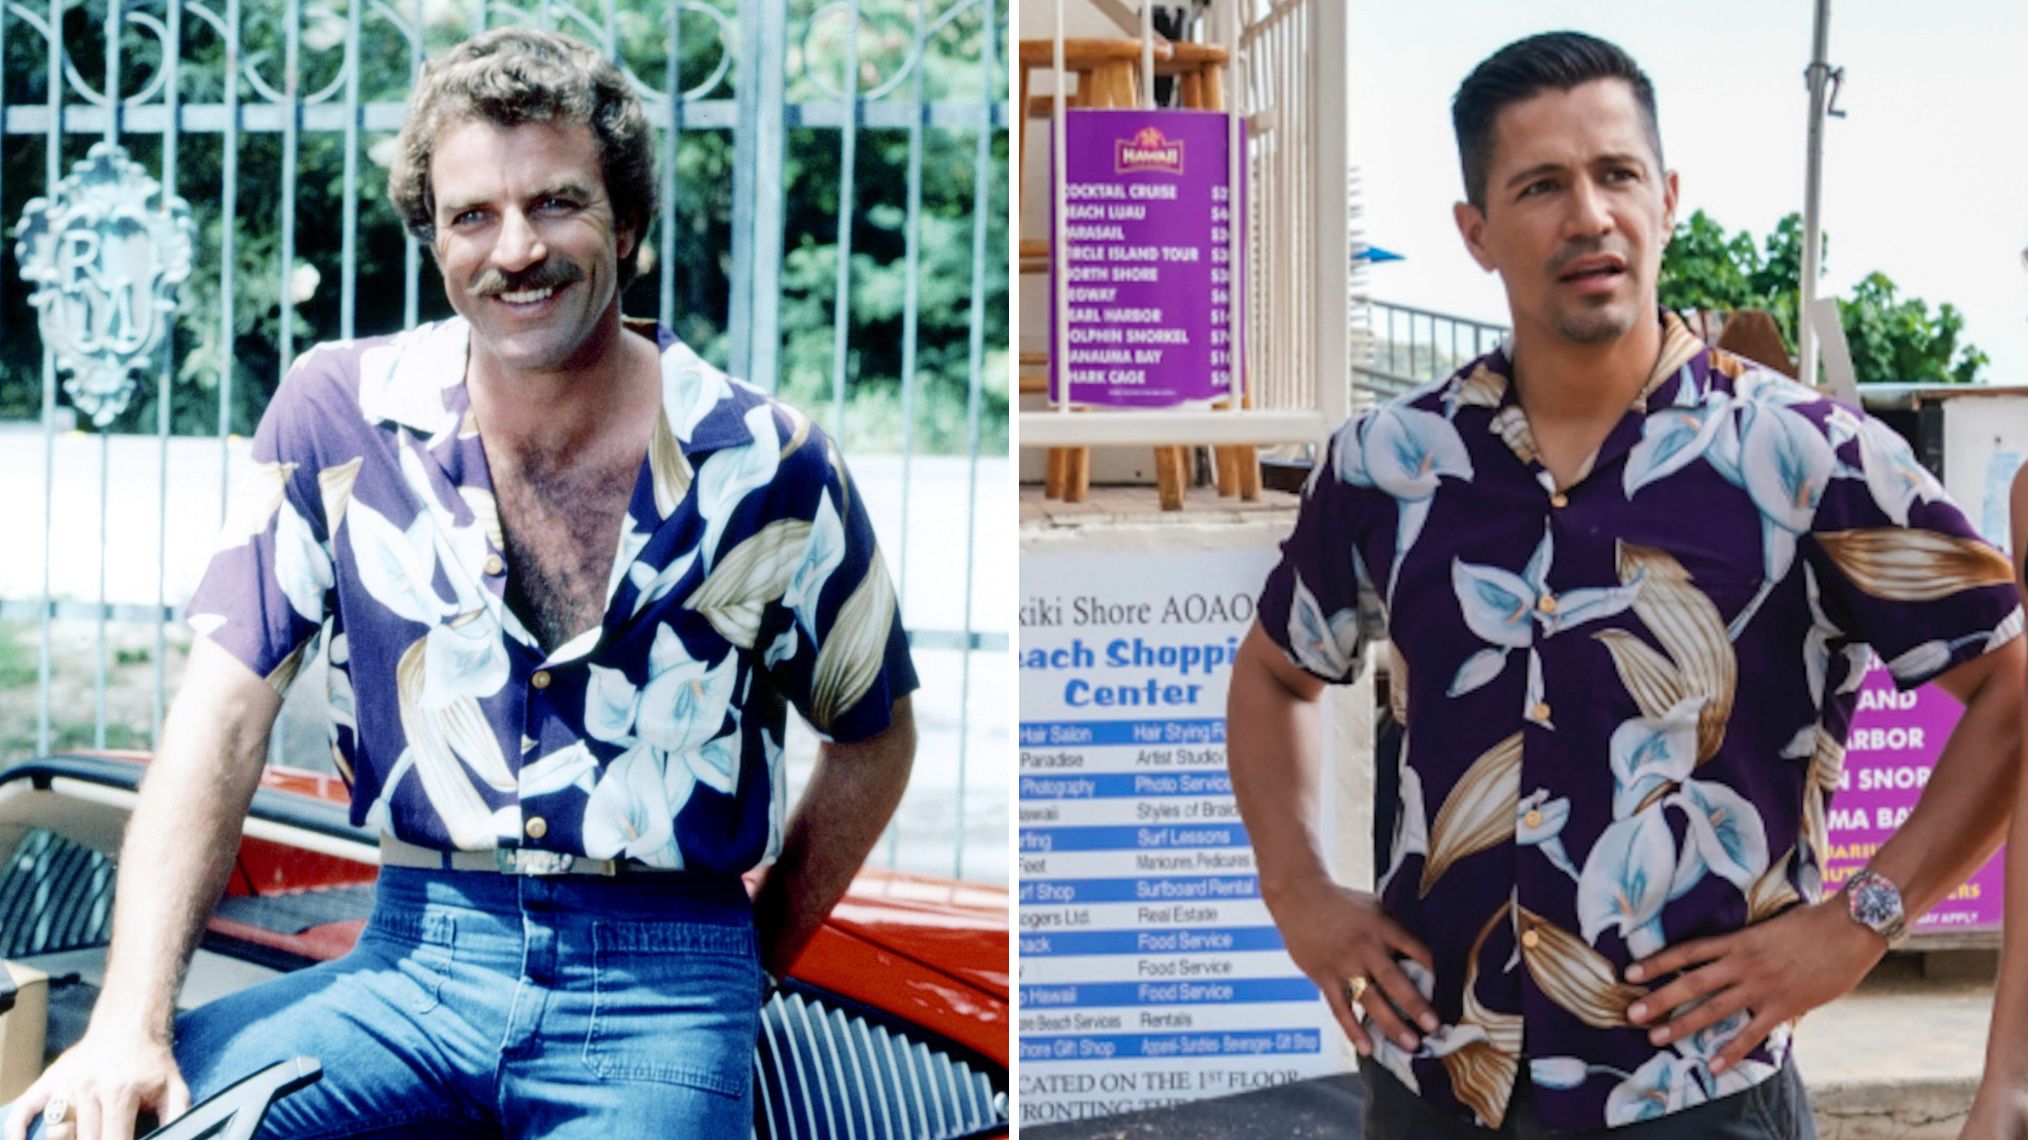 Dress Like Magnum P.I.: Get the Shirt, Sunglasses, Watch and More